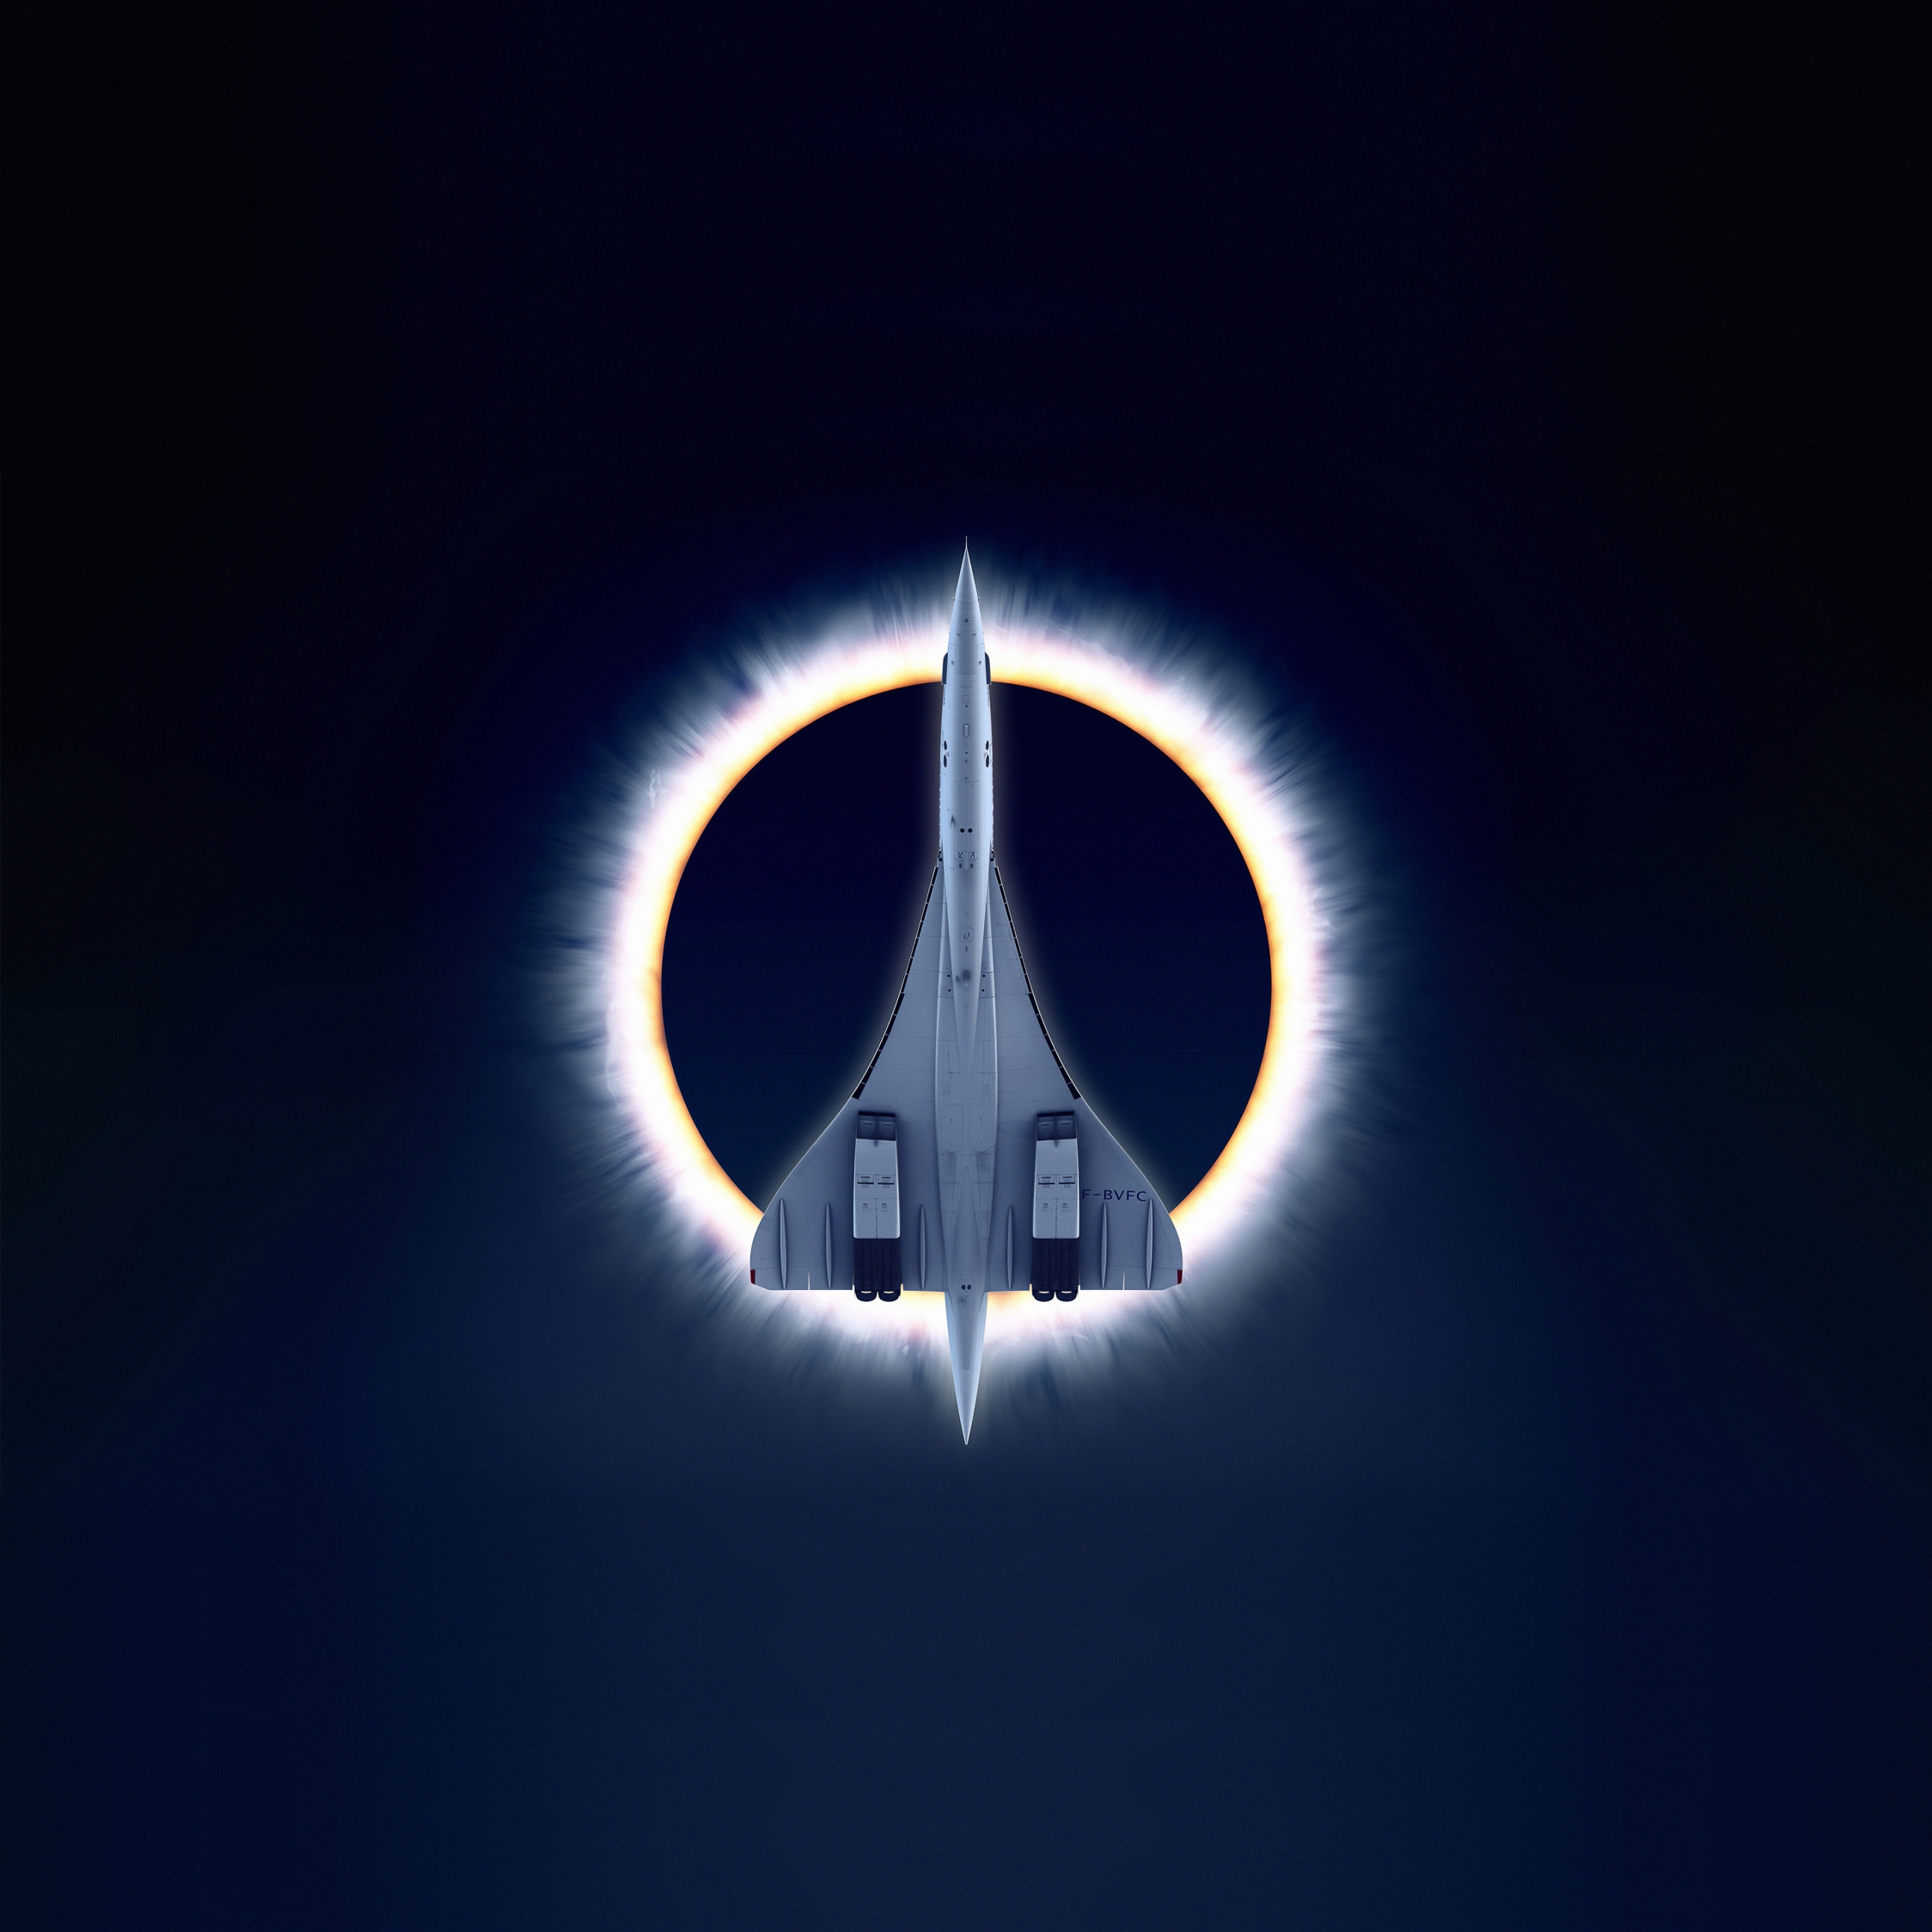 Concorde Carre, eclipse, airplane, moon, aircraft, 2248x2248 wallpaper